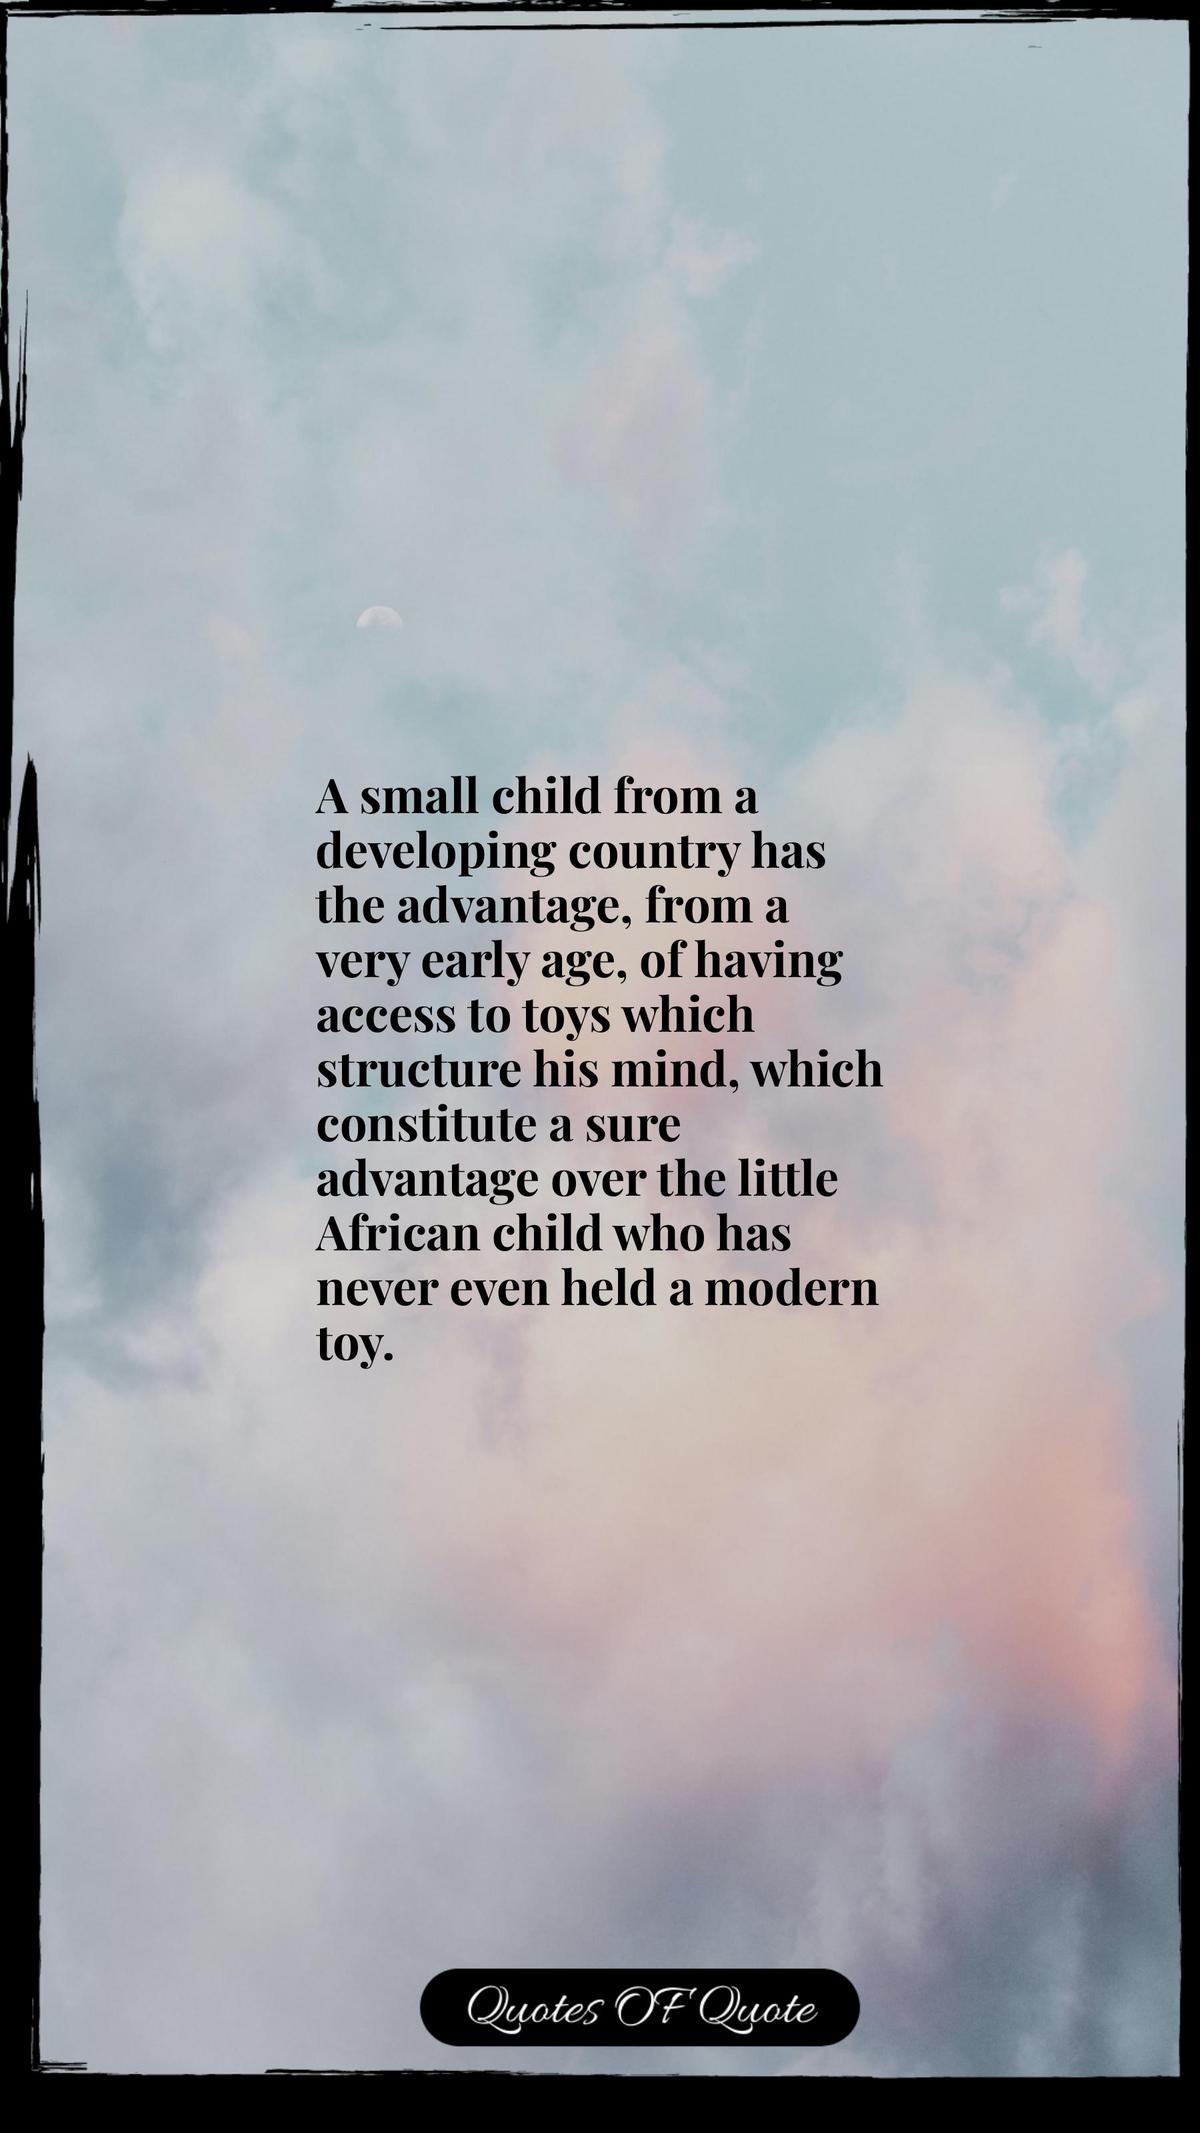 A small child from a developing country has the advantage, from a very early age, of having access to toys which structure his mind, which constitute a sure advantage over the little African child who has never even held a modern toy.